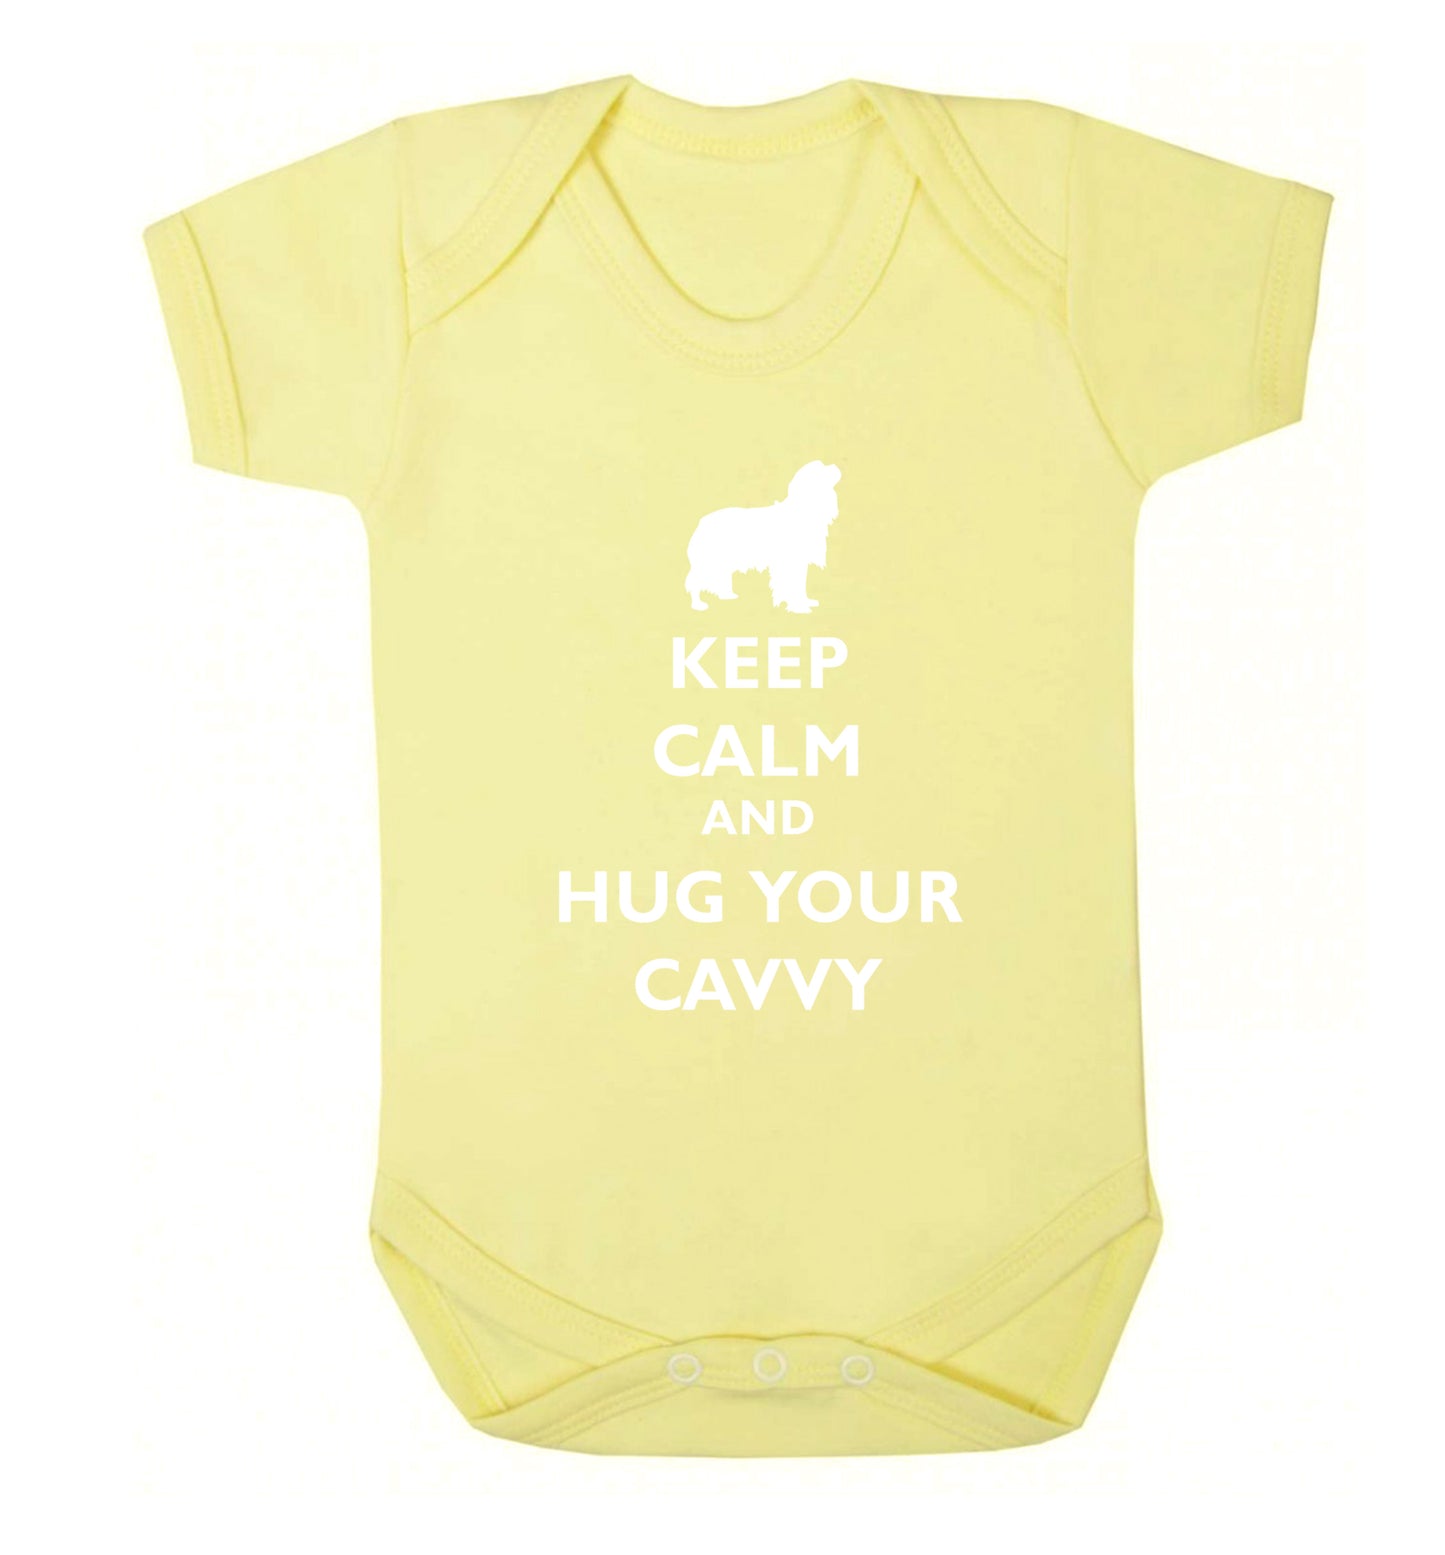 Keep calm and hug your cavvy Baby Vest pale yellow 18-24 months